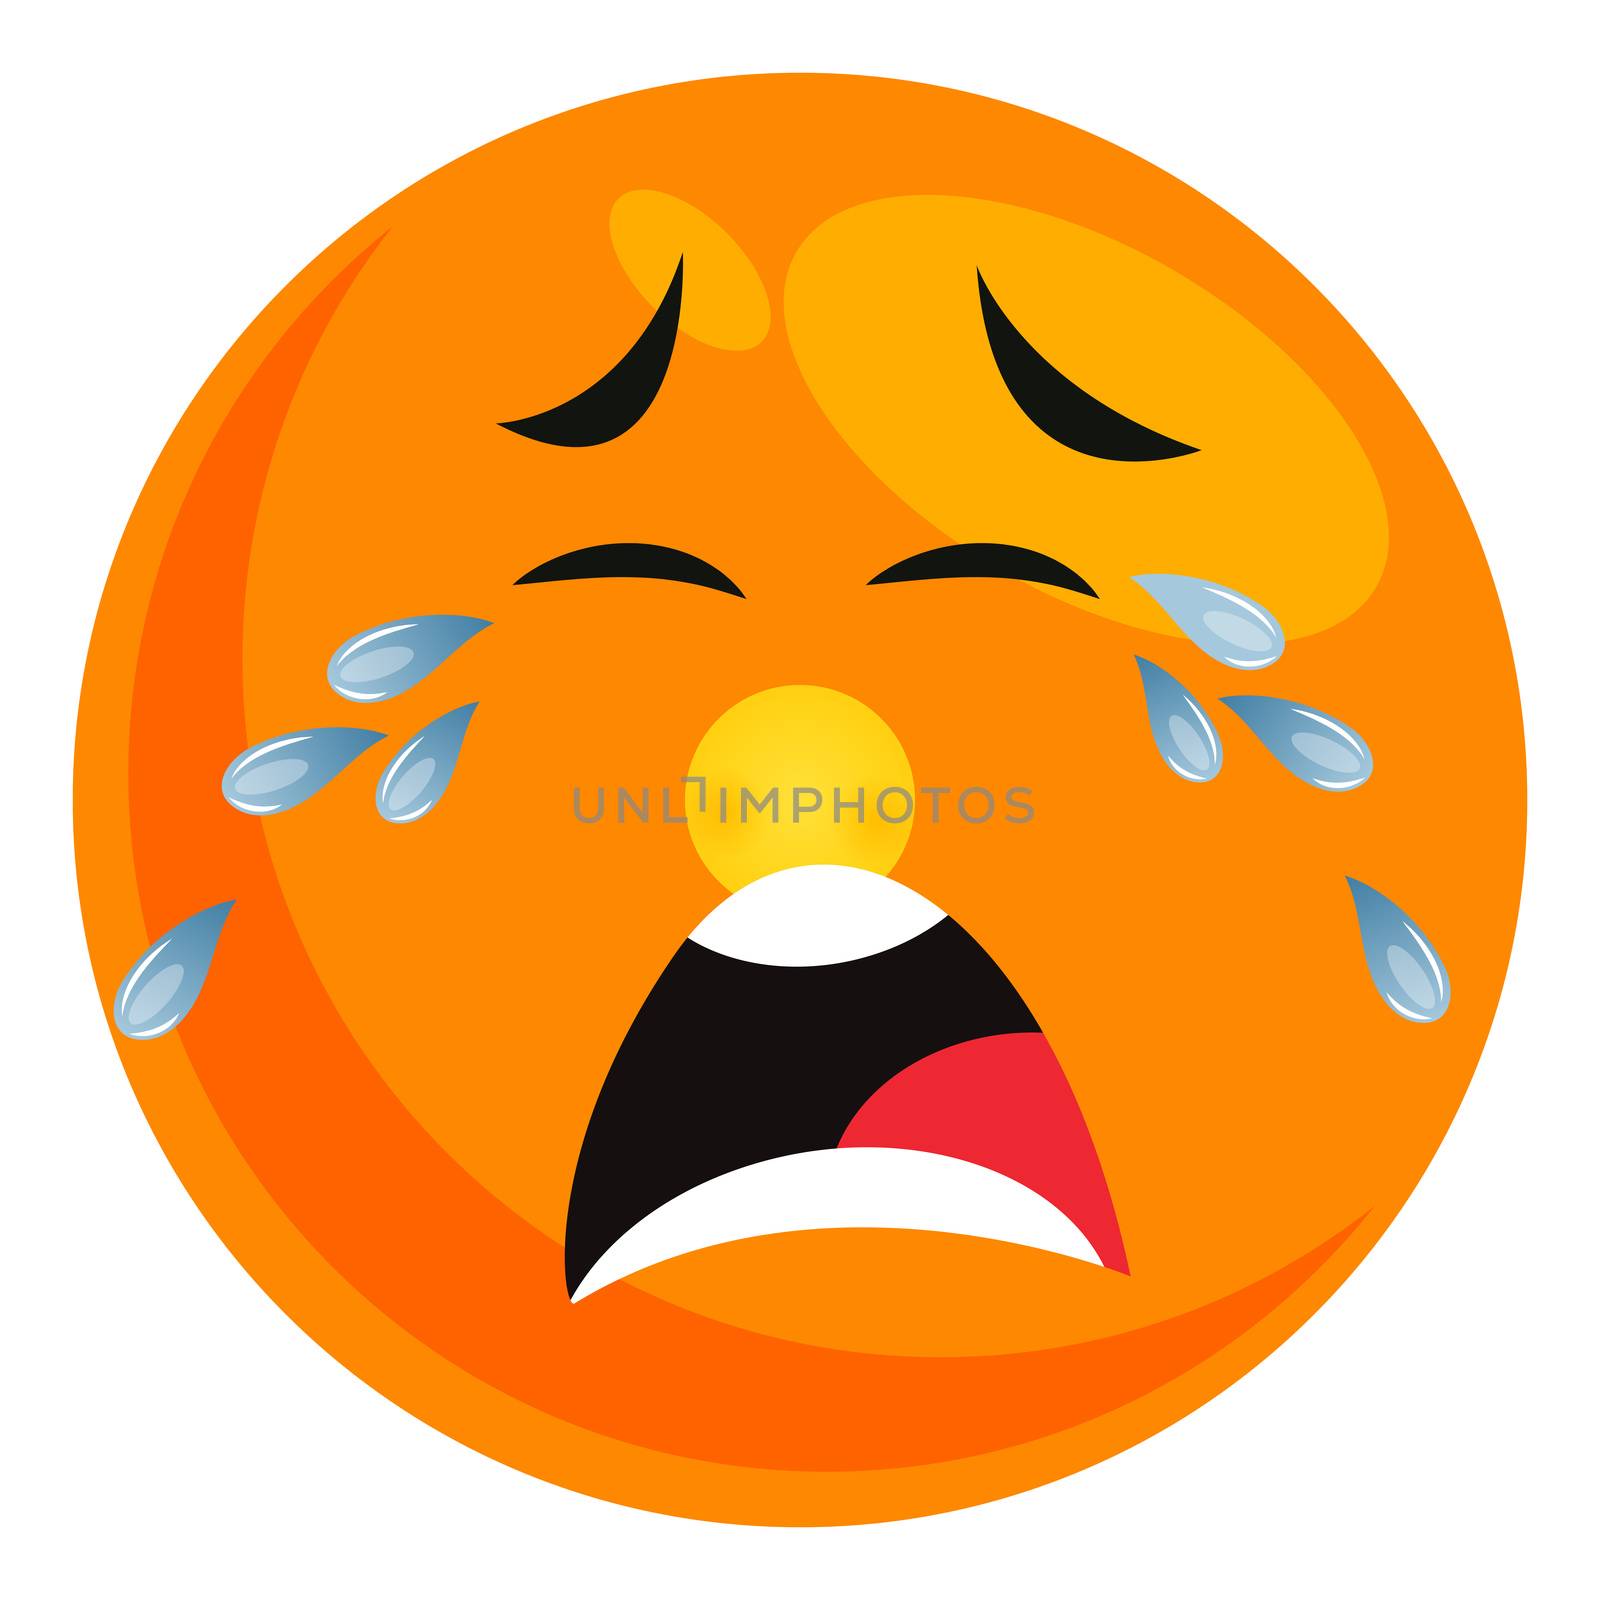 Crying tears smiley, illustration, vector on white background